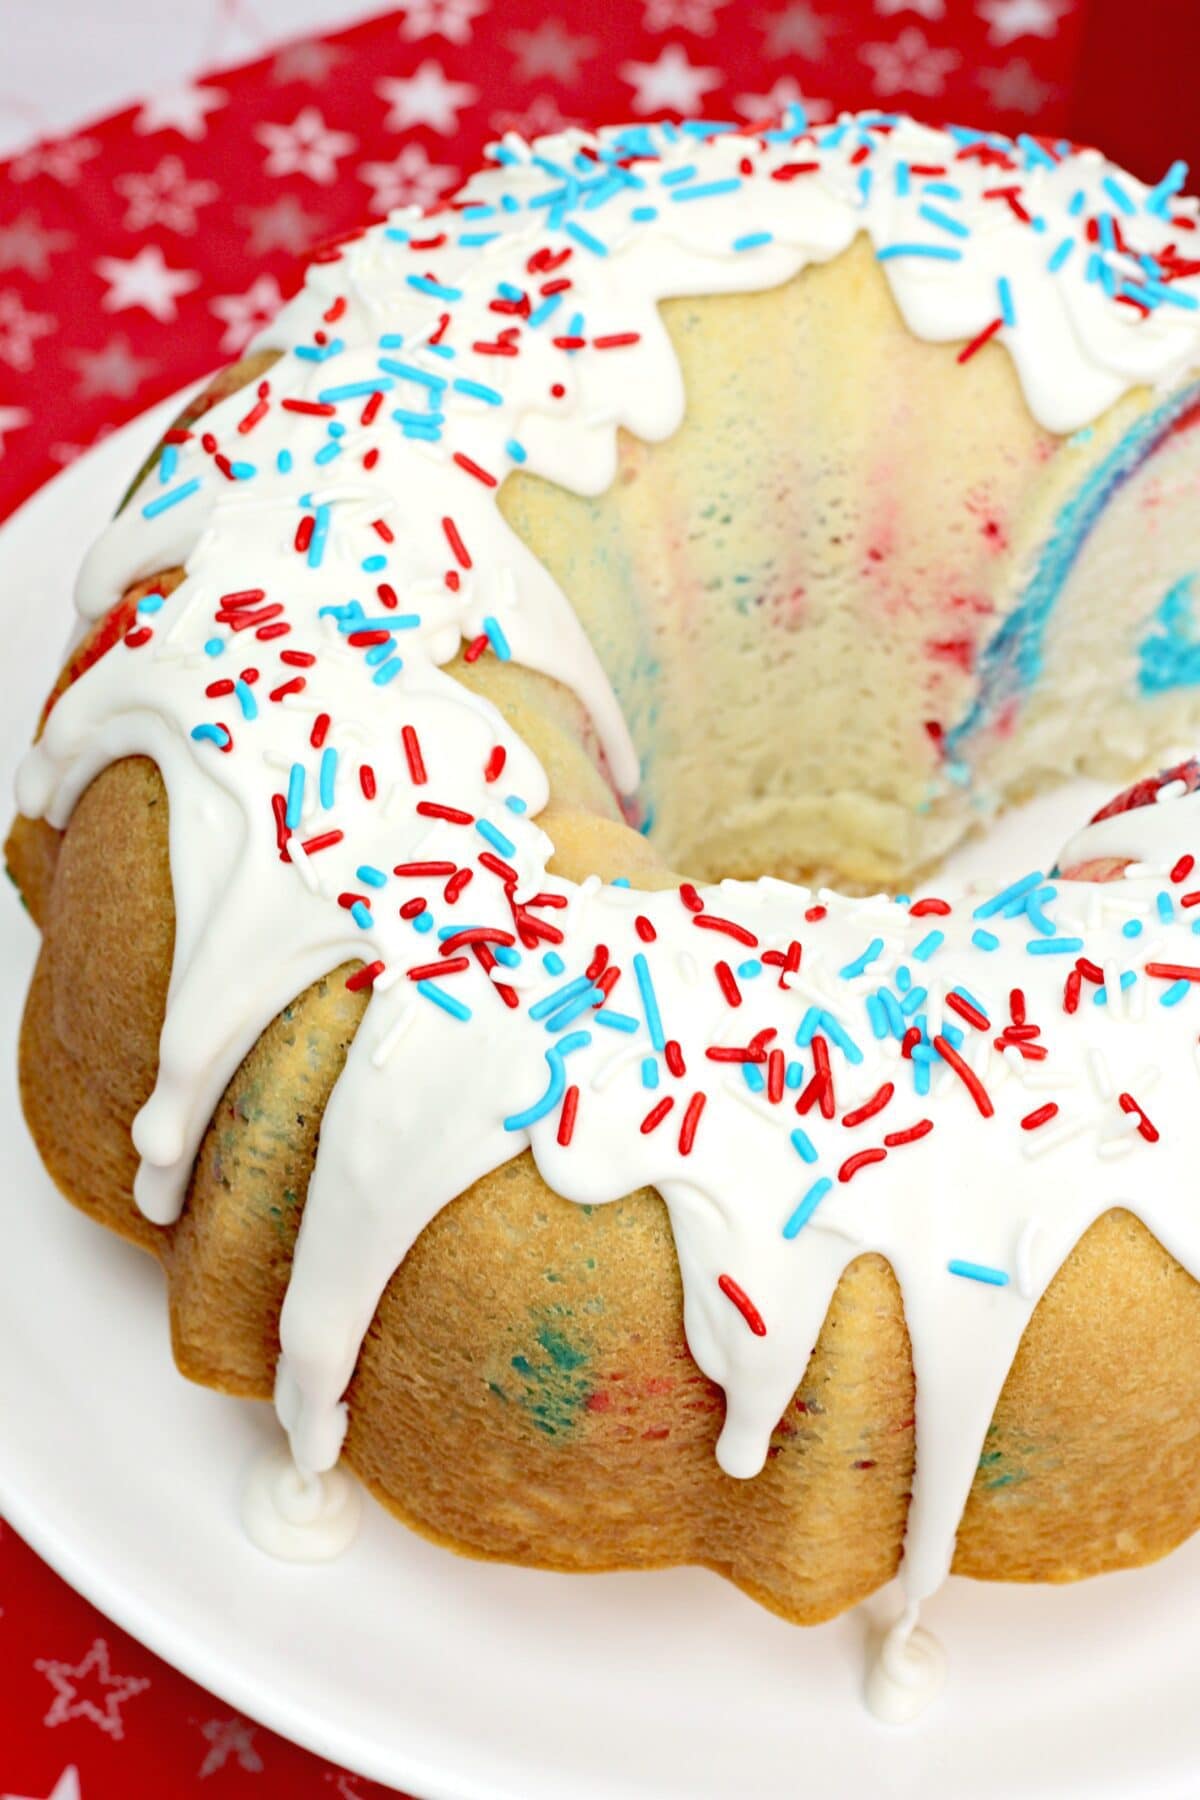 red white and blue bundt cake